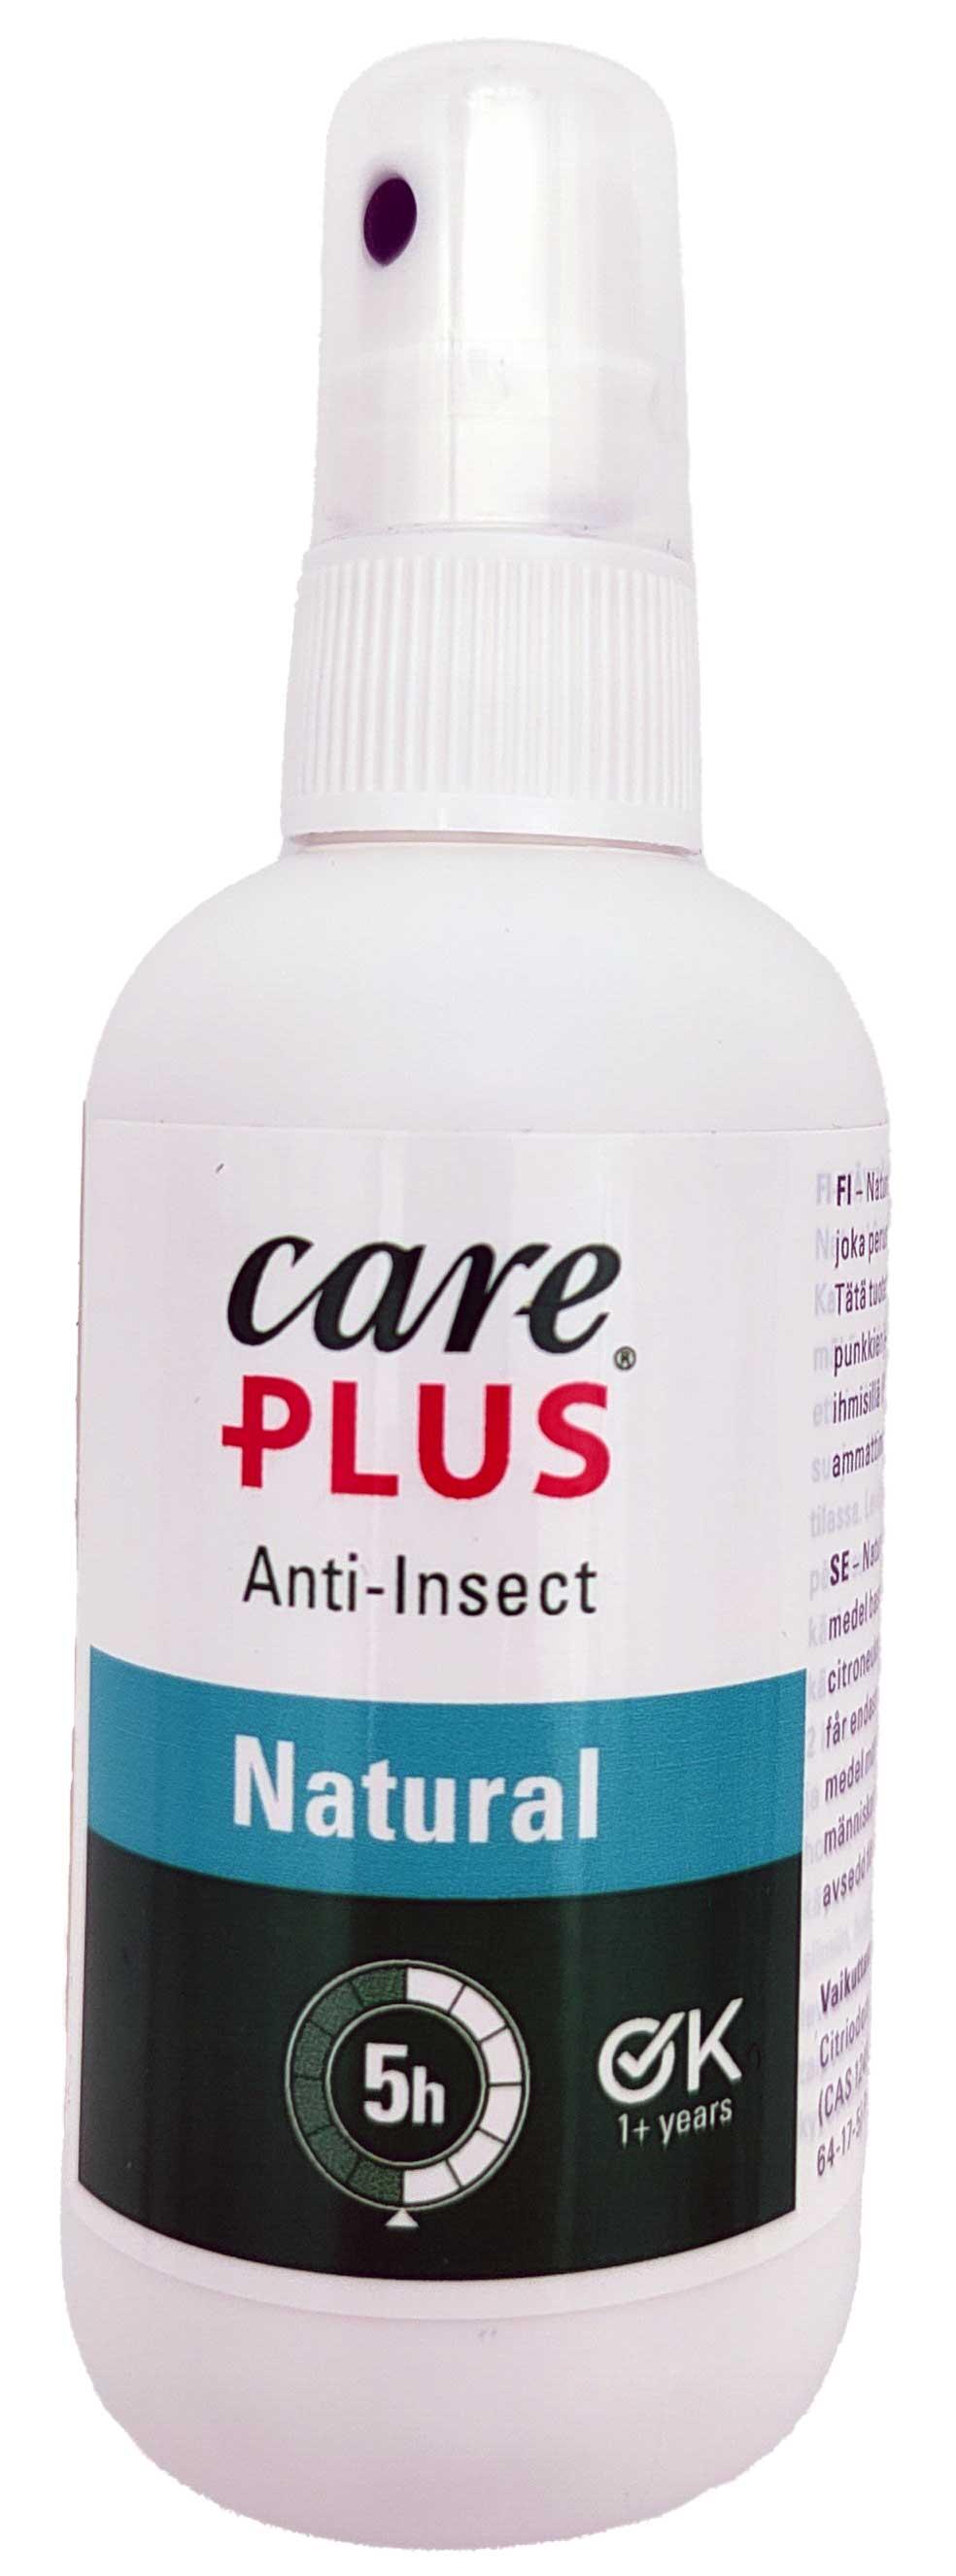 Anti-insect natural Care Plus